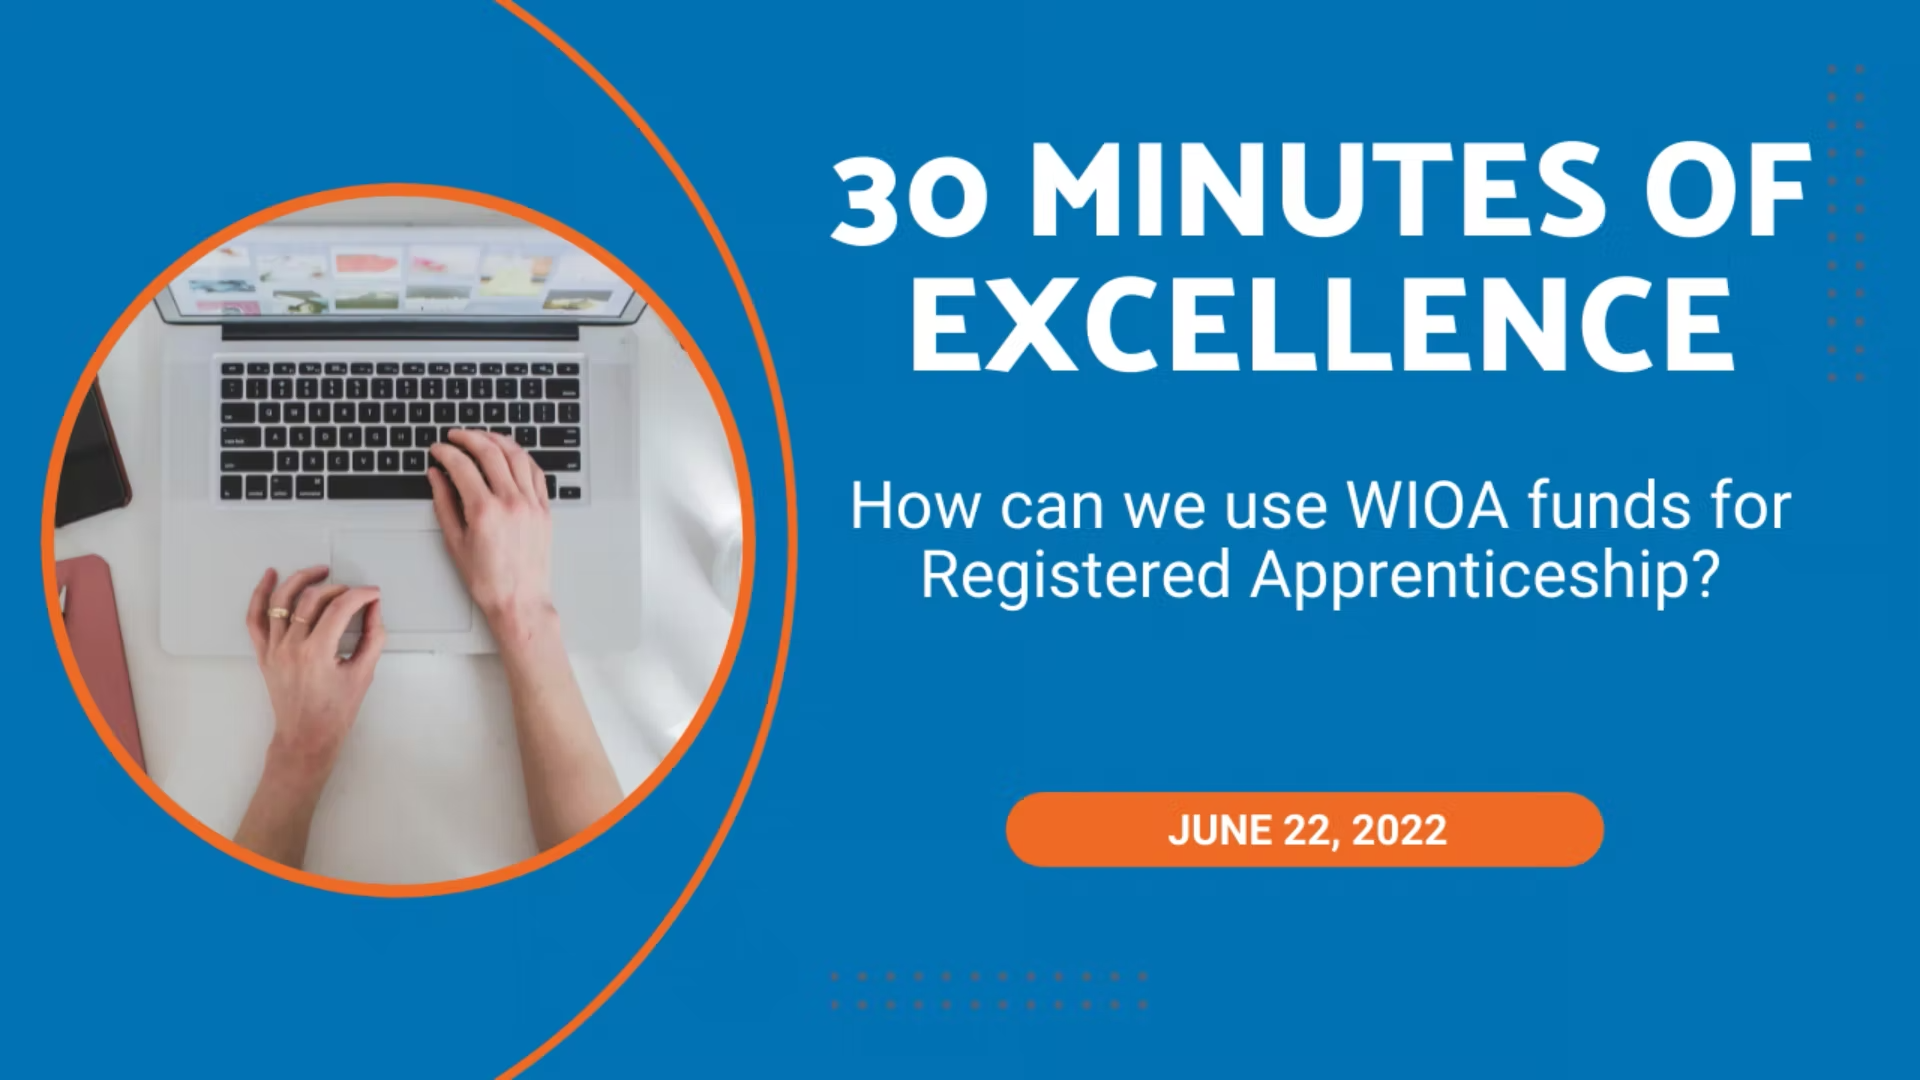 30 Minutes of Excellence - How can we use WIOA funds for Registered Apprenticeship?